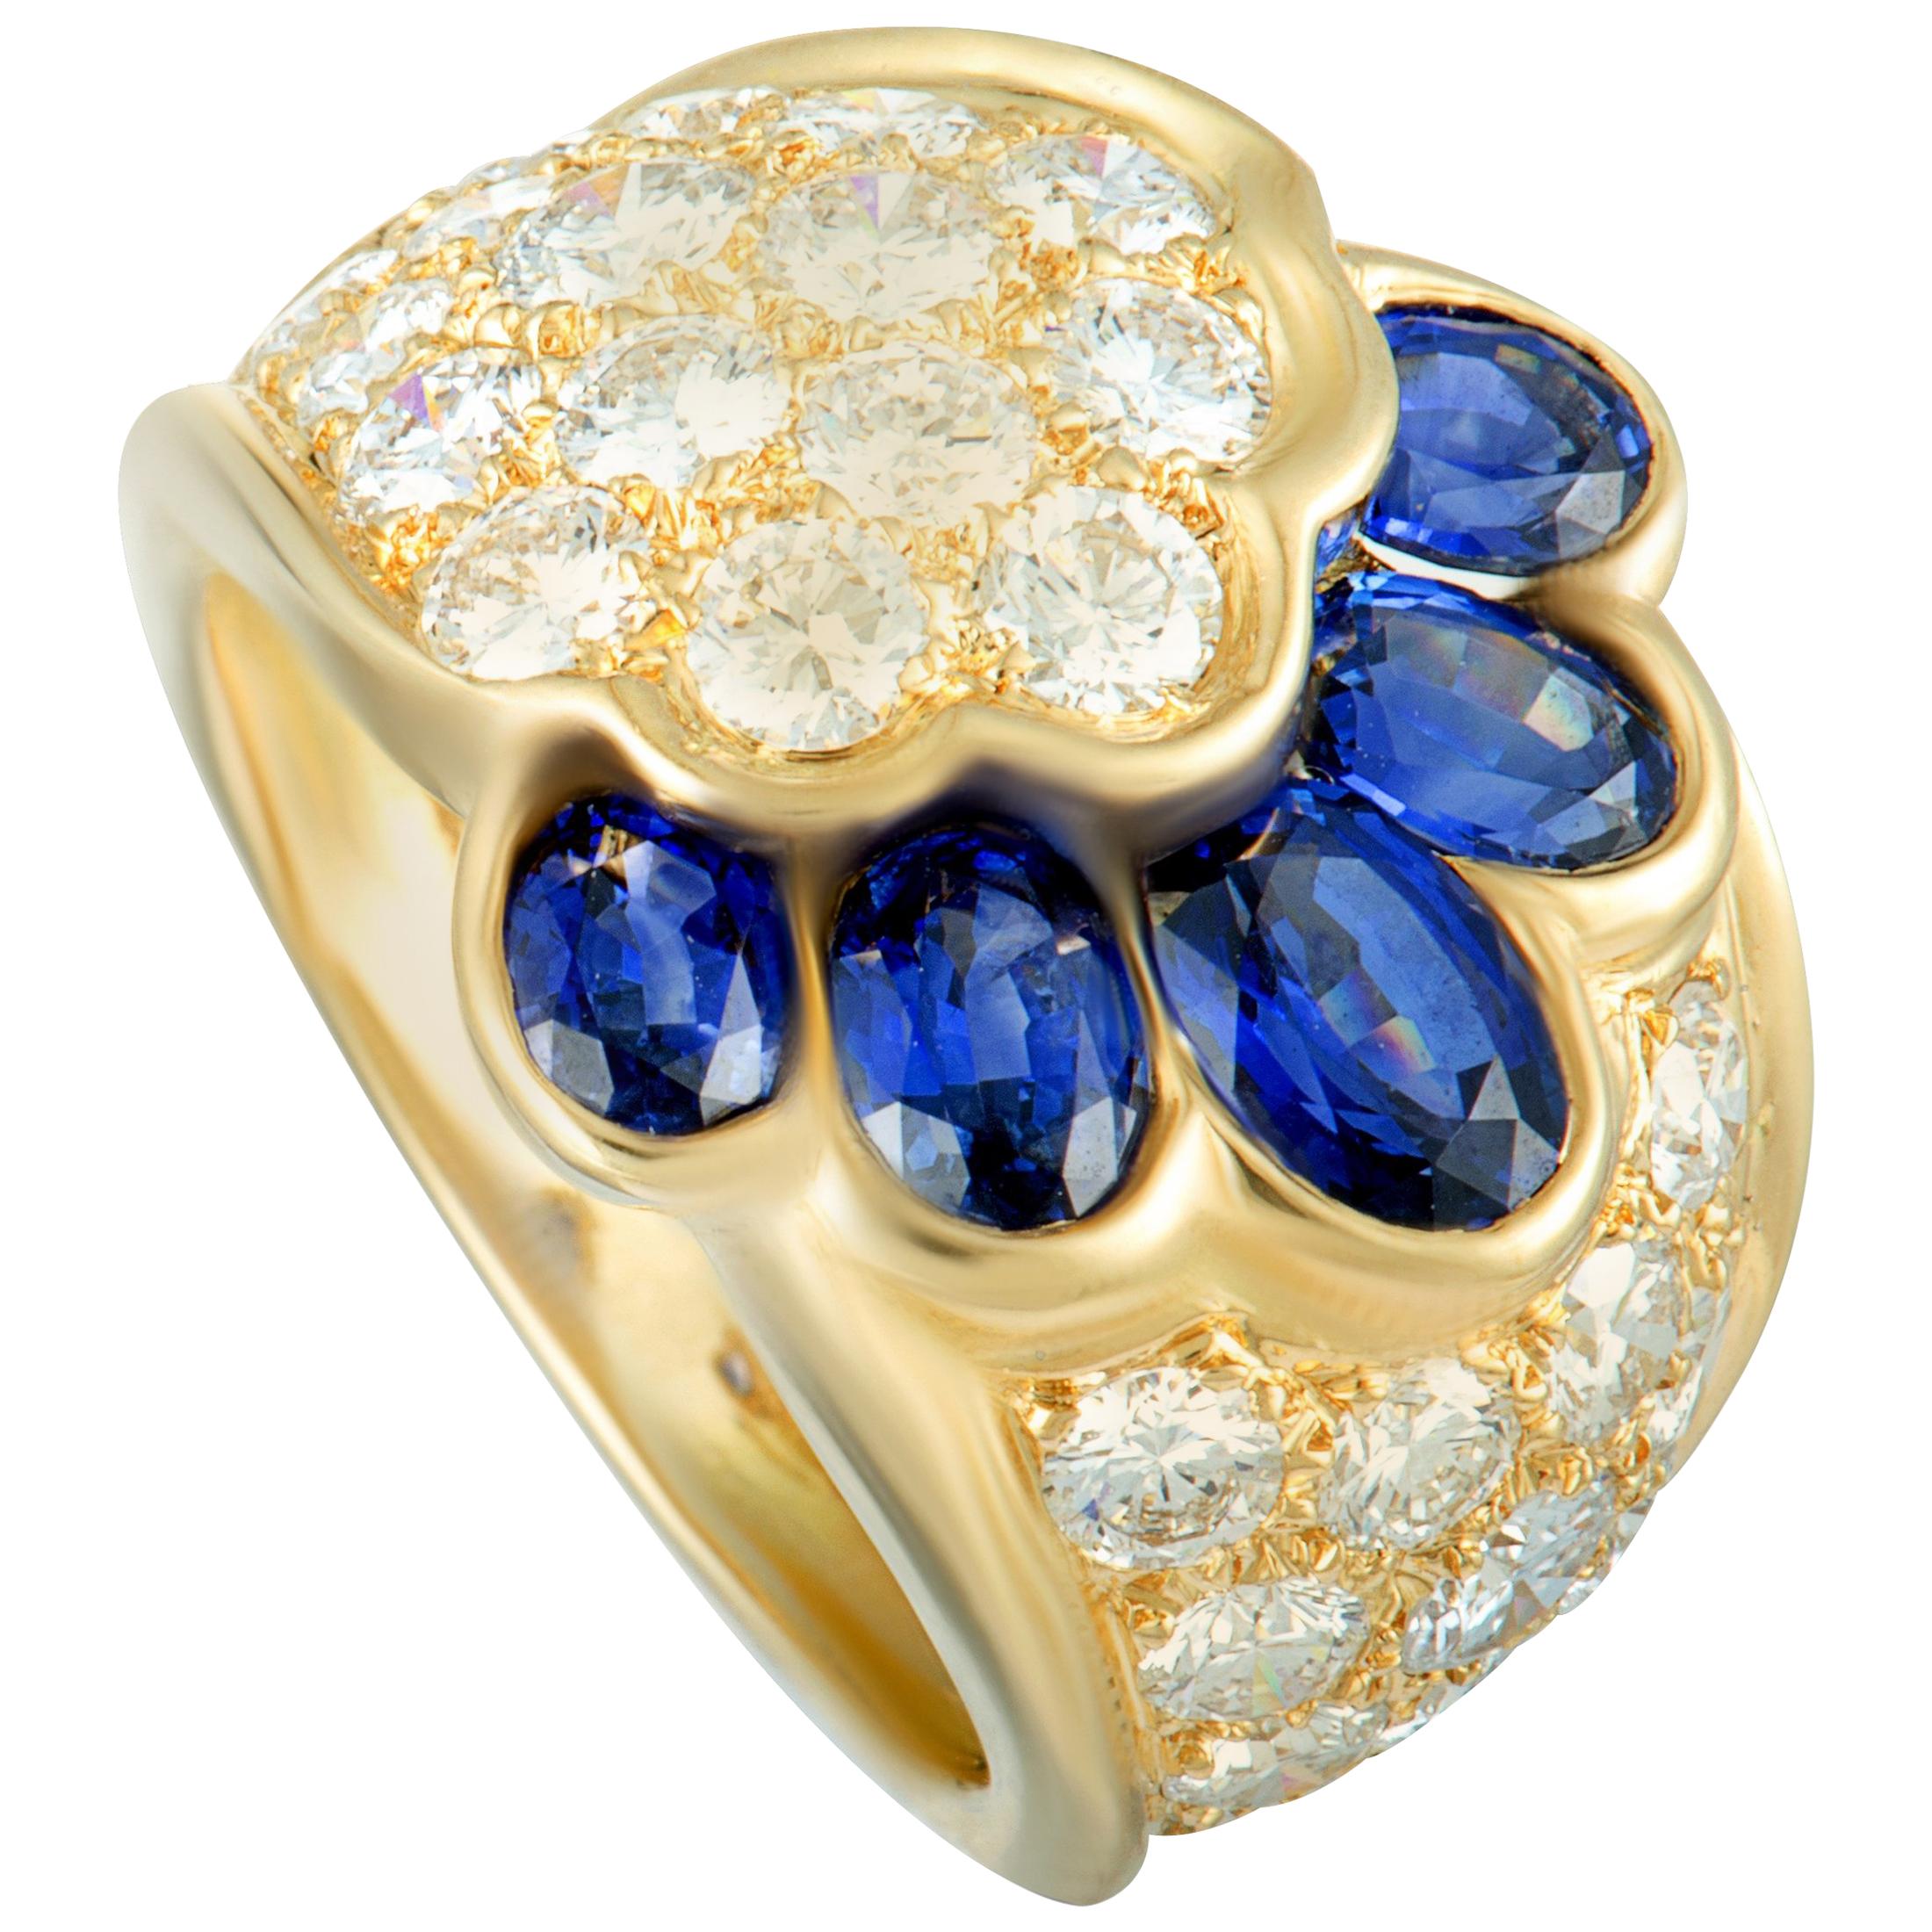 Van Cleef & Arpels Diamond and Sapphire Yellow Gold Wide Band Ring Size 6.25